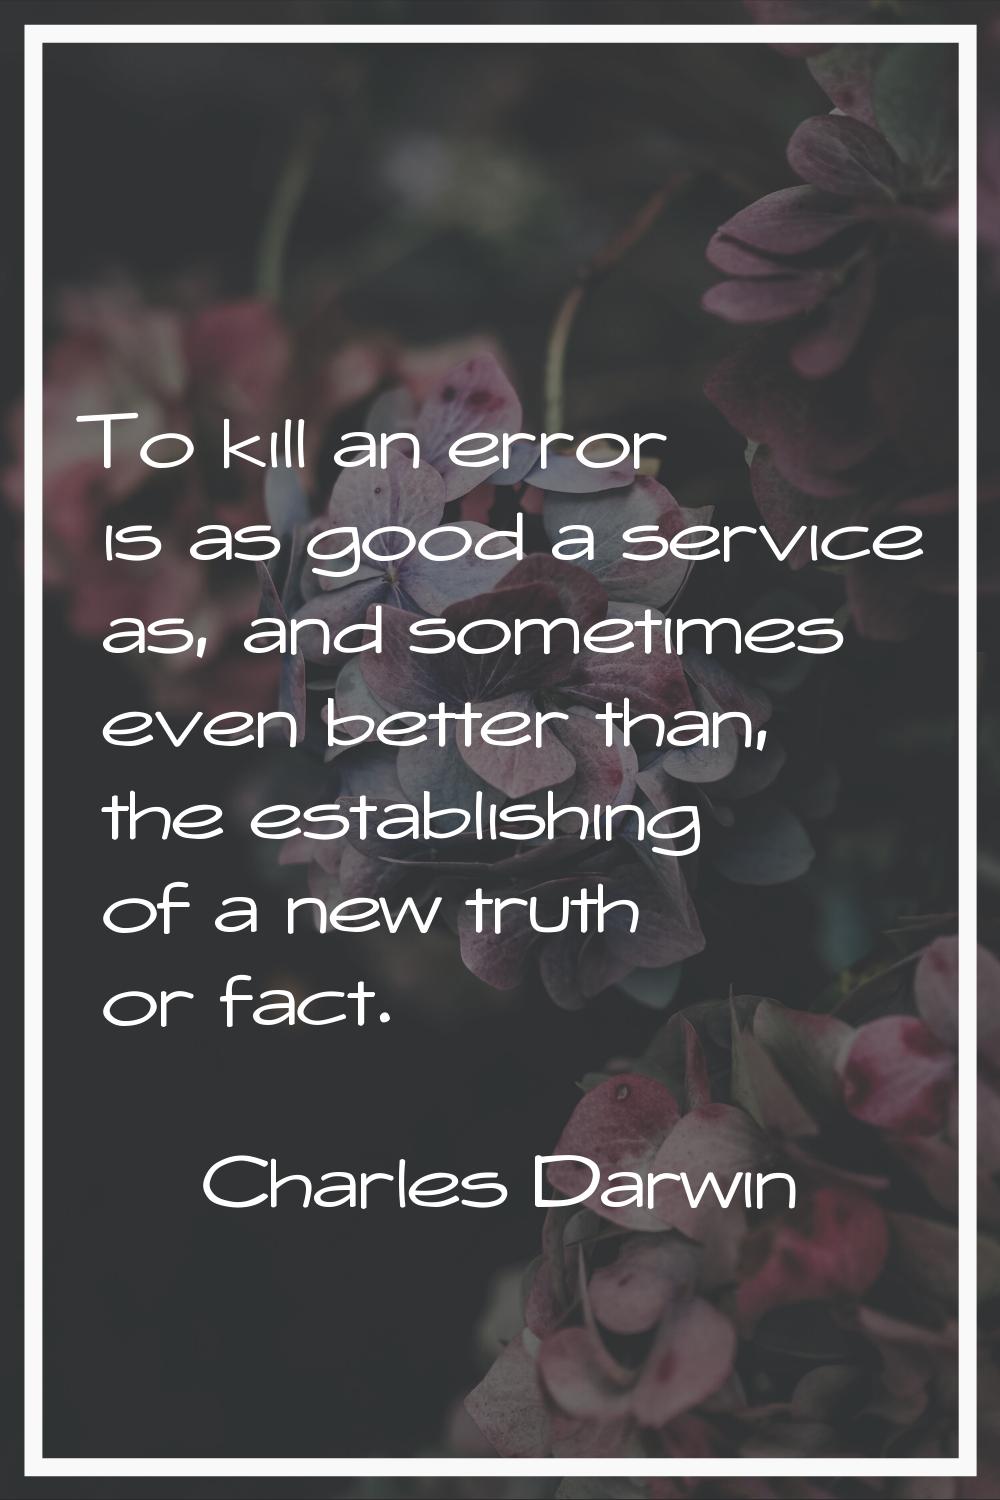 To kill an error is as good a service as, and sometimes even better than, the establishing of a new